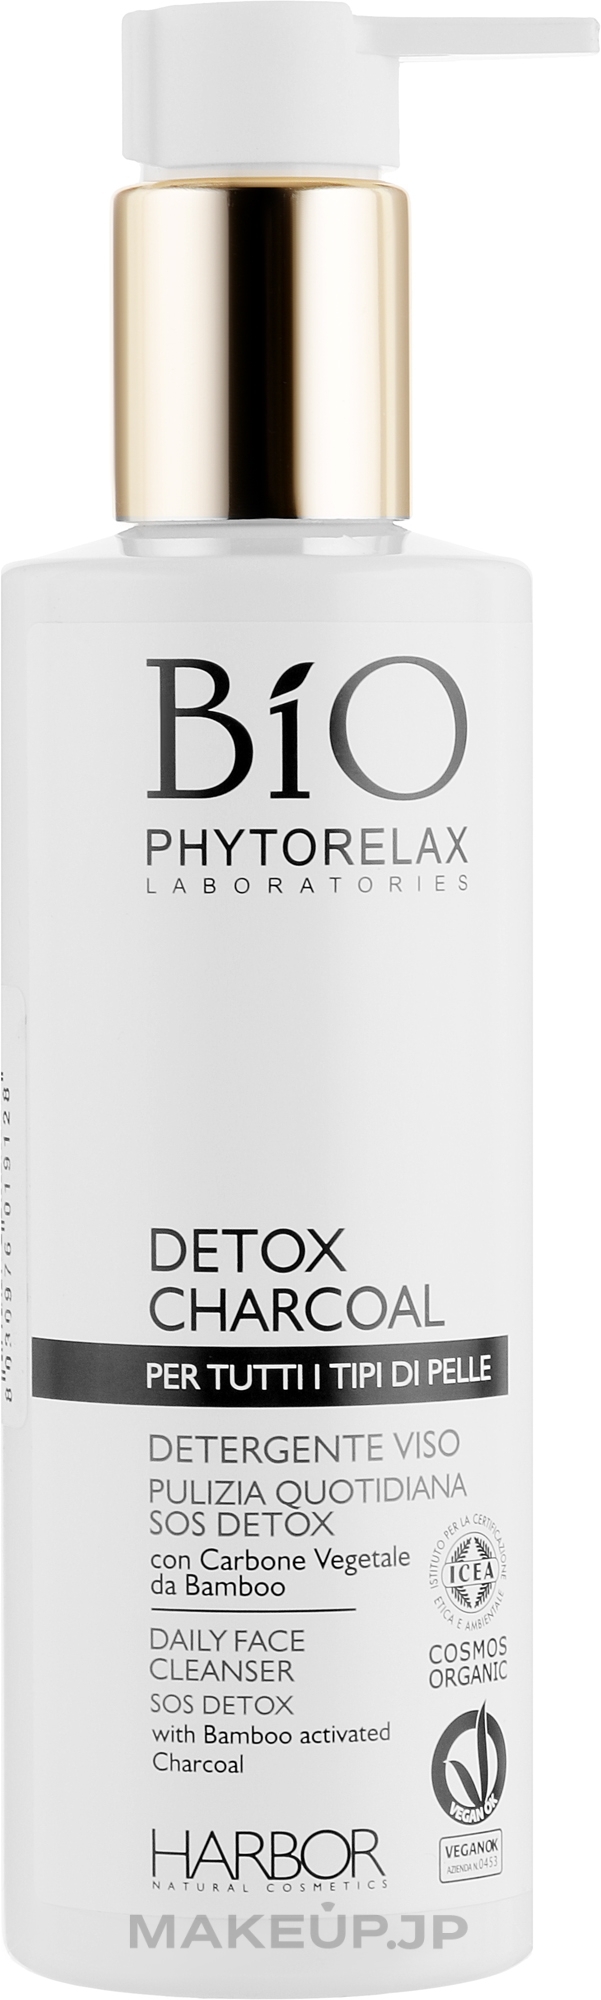 Facial Cleansing Gel with Activated Charcoal - Phytorelax Laboratories Bio Phytorelax Detox Charcoal Daily Face Cleanser Sos Detox — photo 200 ml